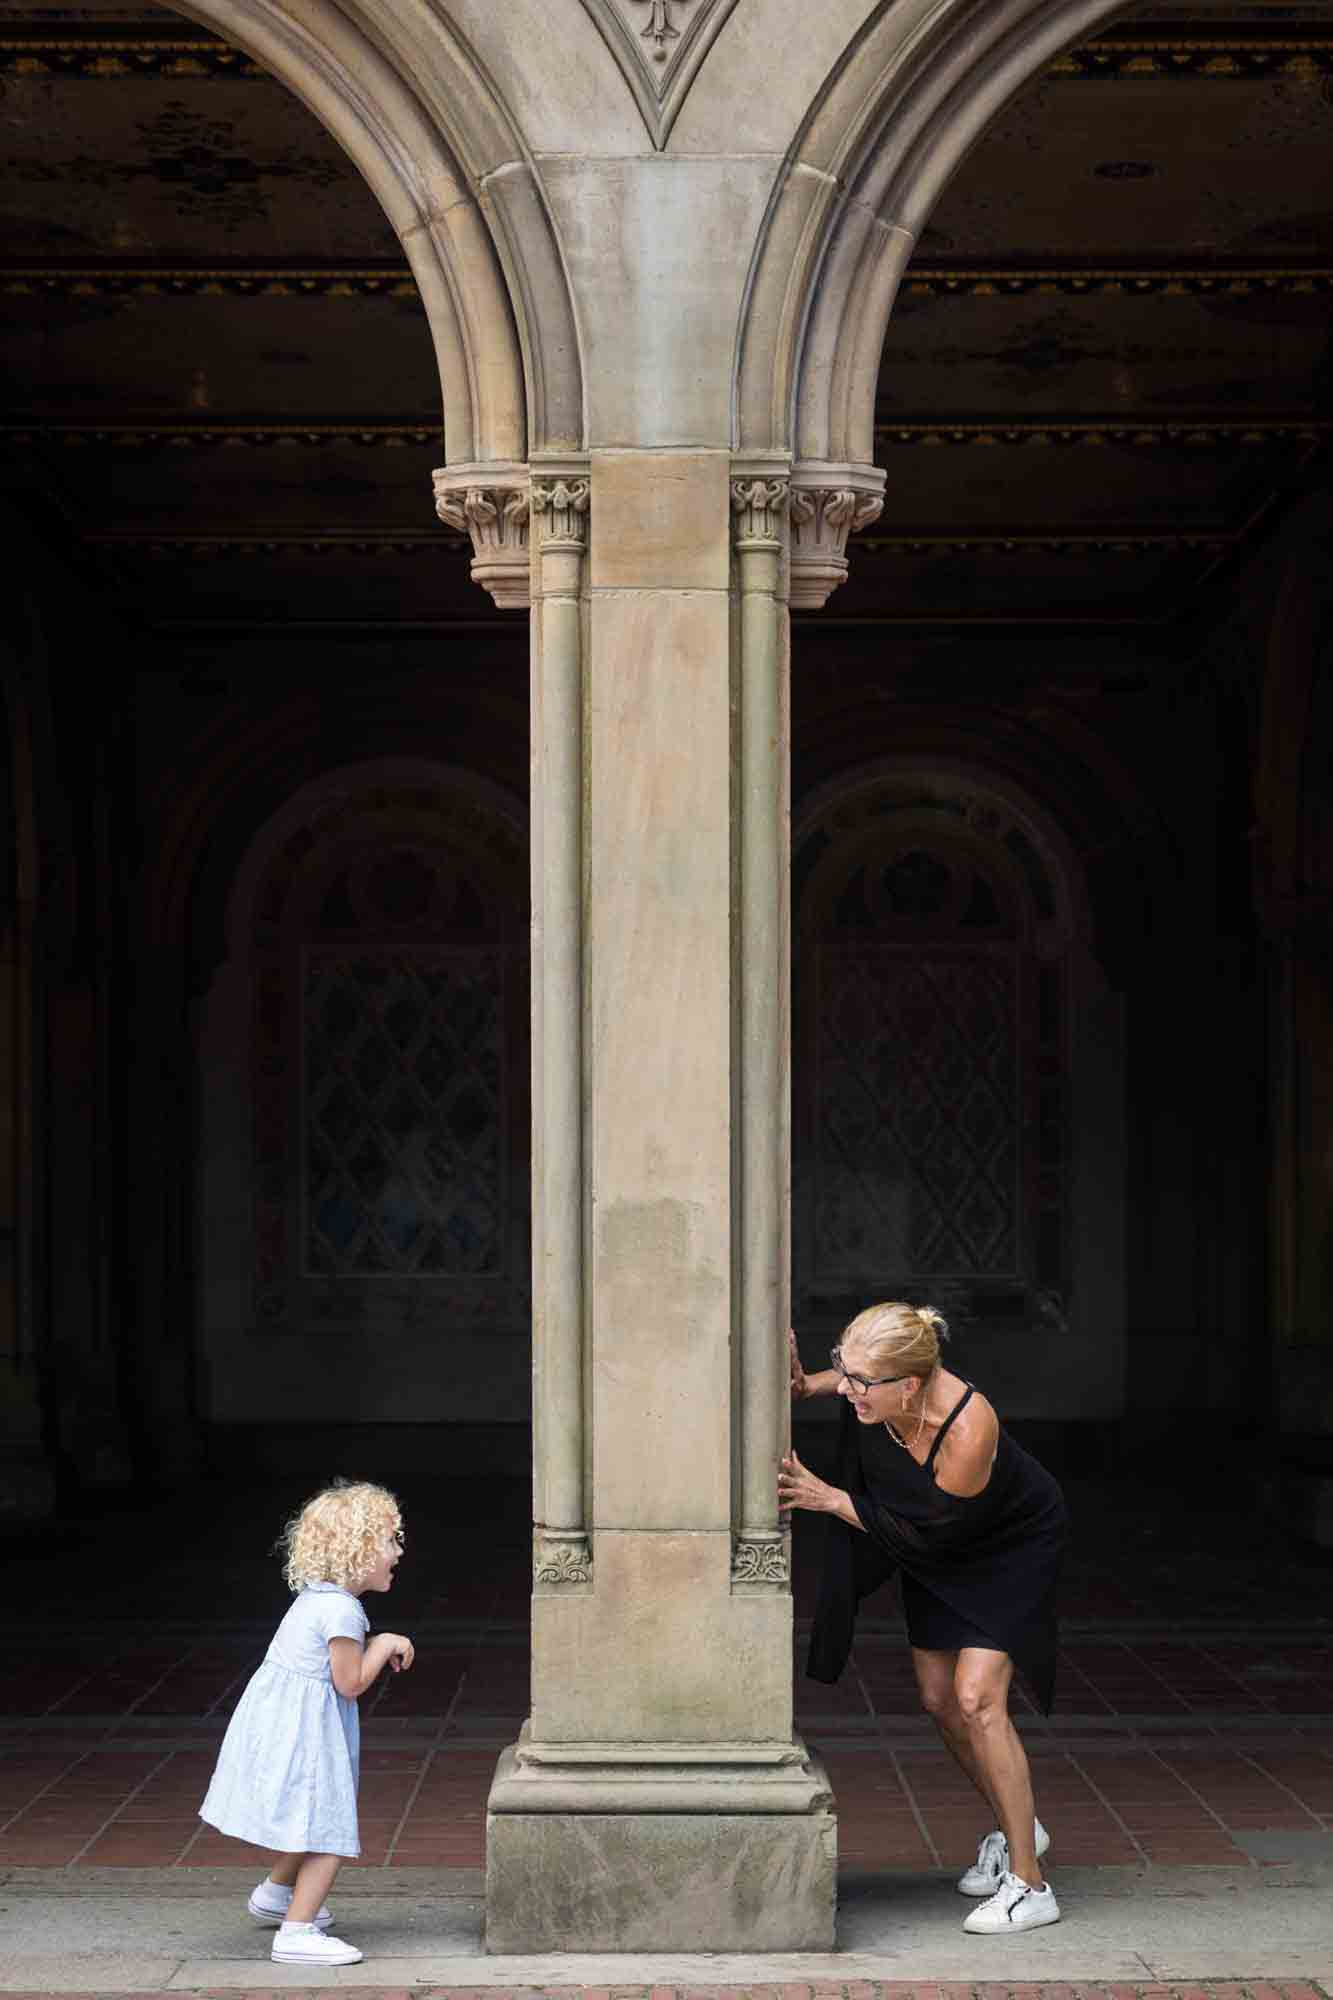 Grandmother and little girl playing around stone column for an article on NYC family portrait tips for tourists